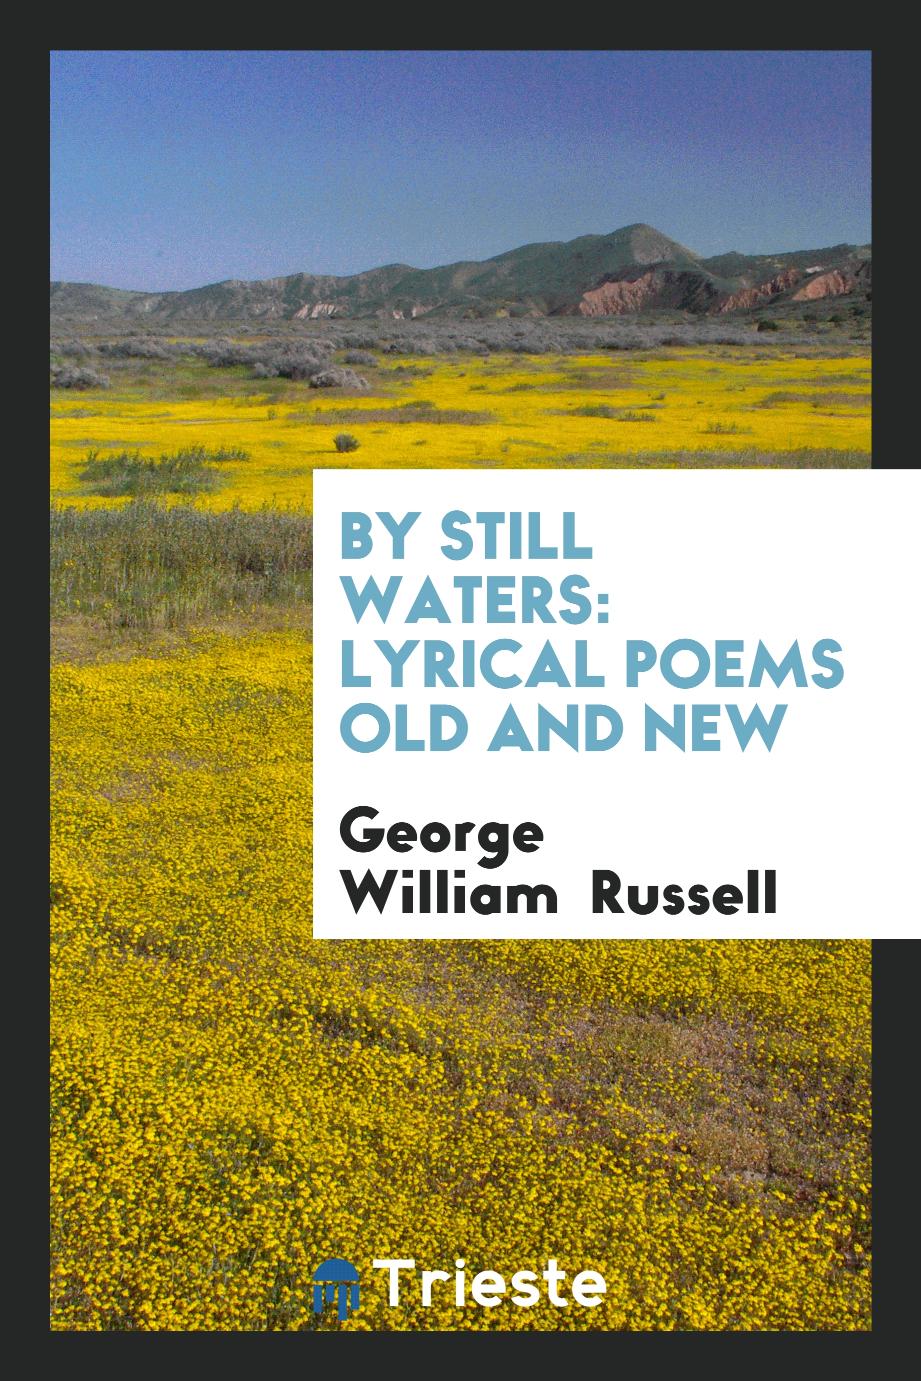 By Still Waters: lyrical poems old and new